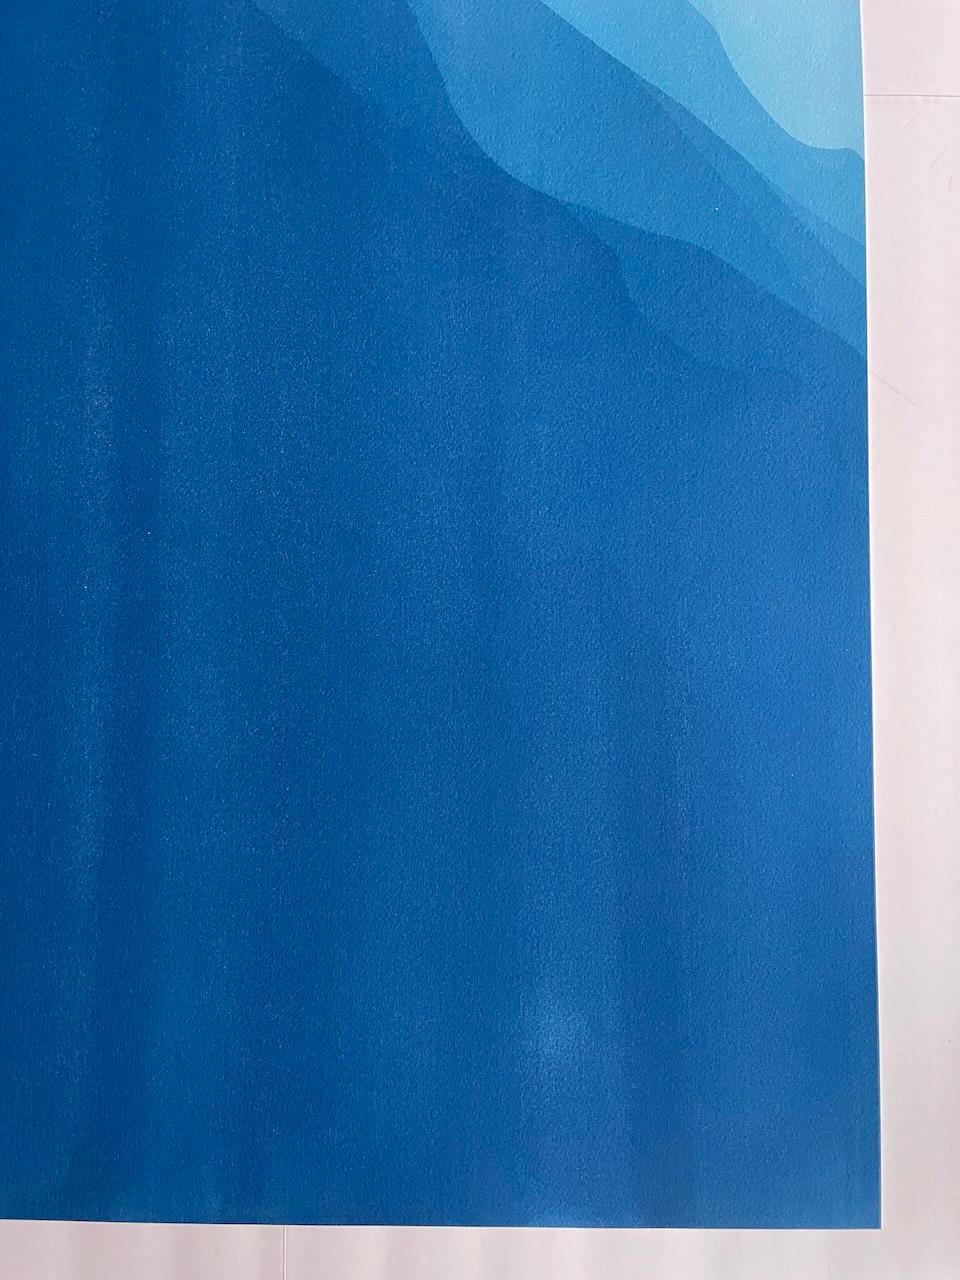 Sea Cliffs 6 (Hand-printed 40 x 20 inch abstract cyanotype) For Sale 5